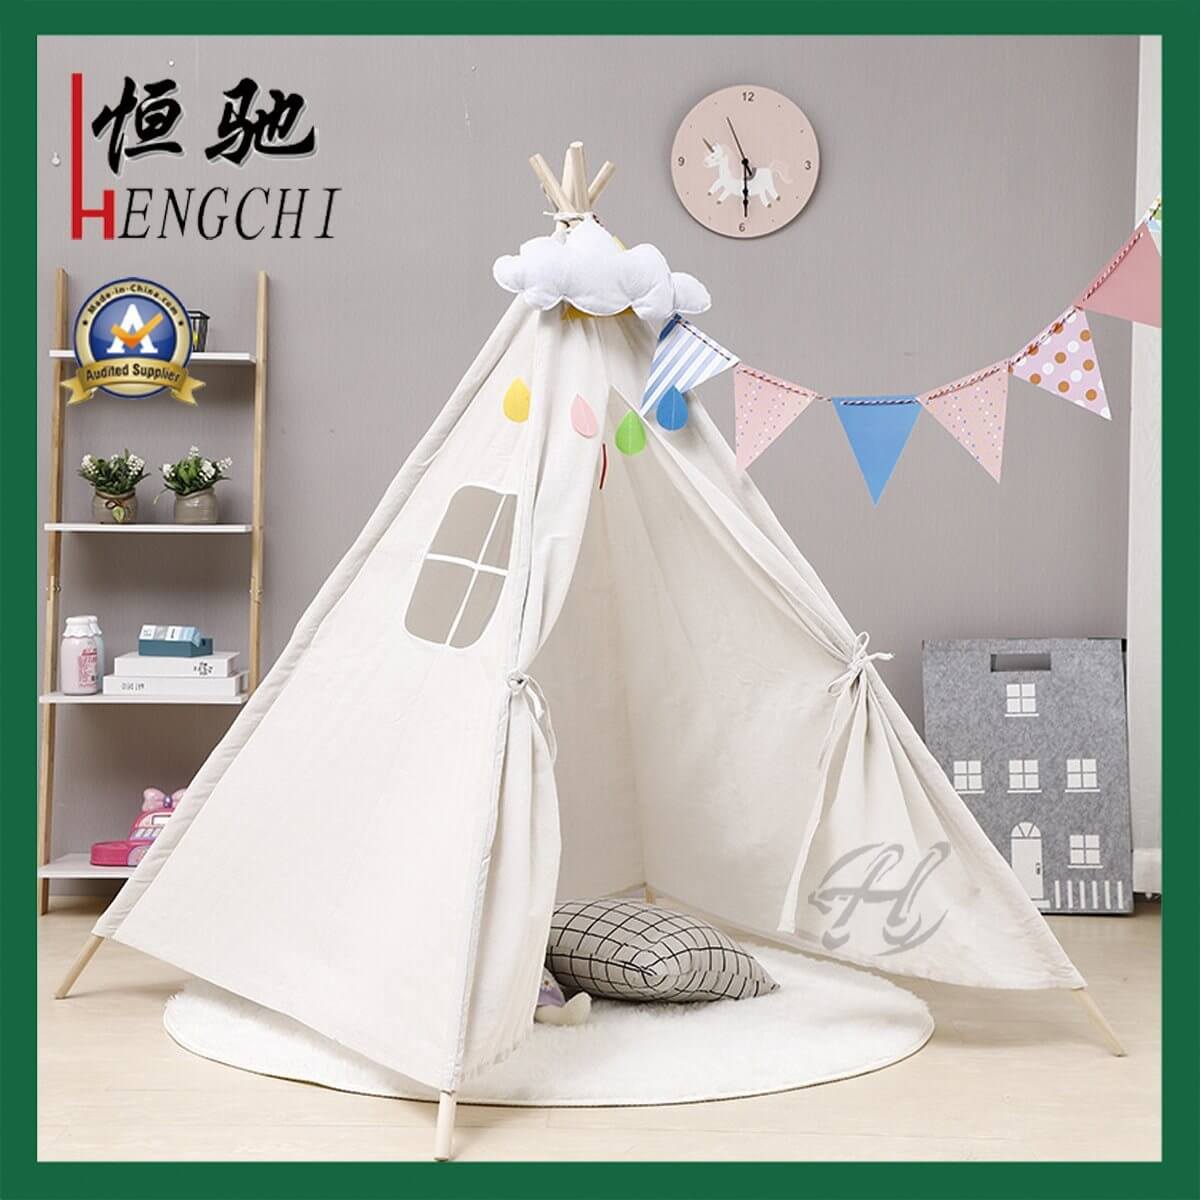 Kids-Indian-Teepee-Tent-Children-Play-Tent-Cotton-Canvas-Tent